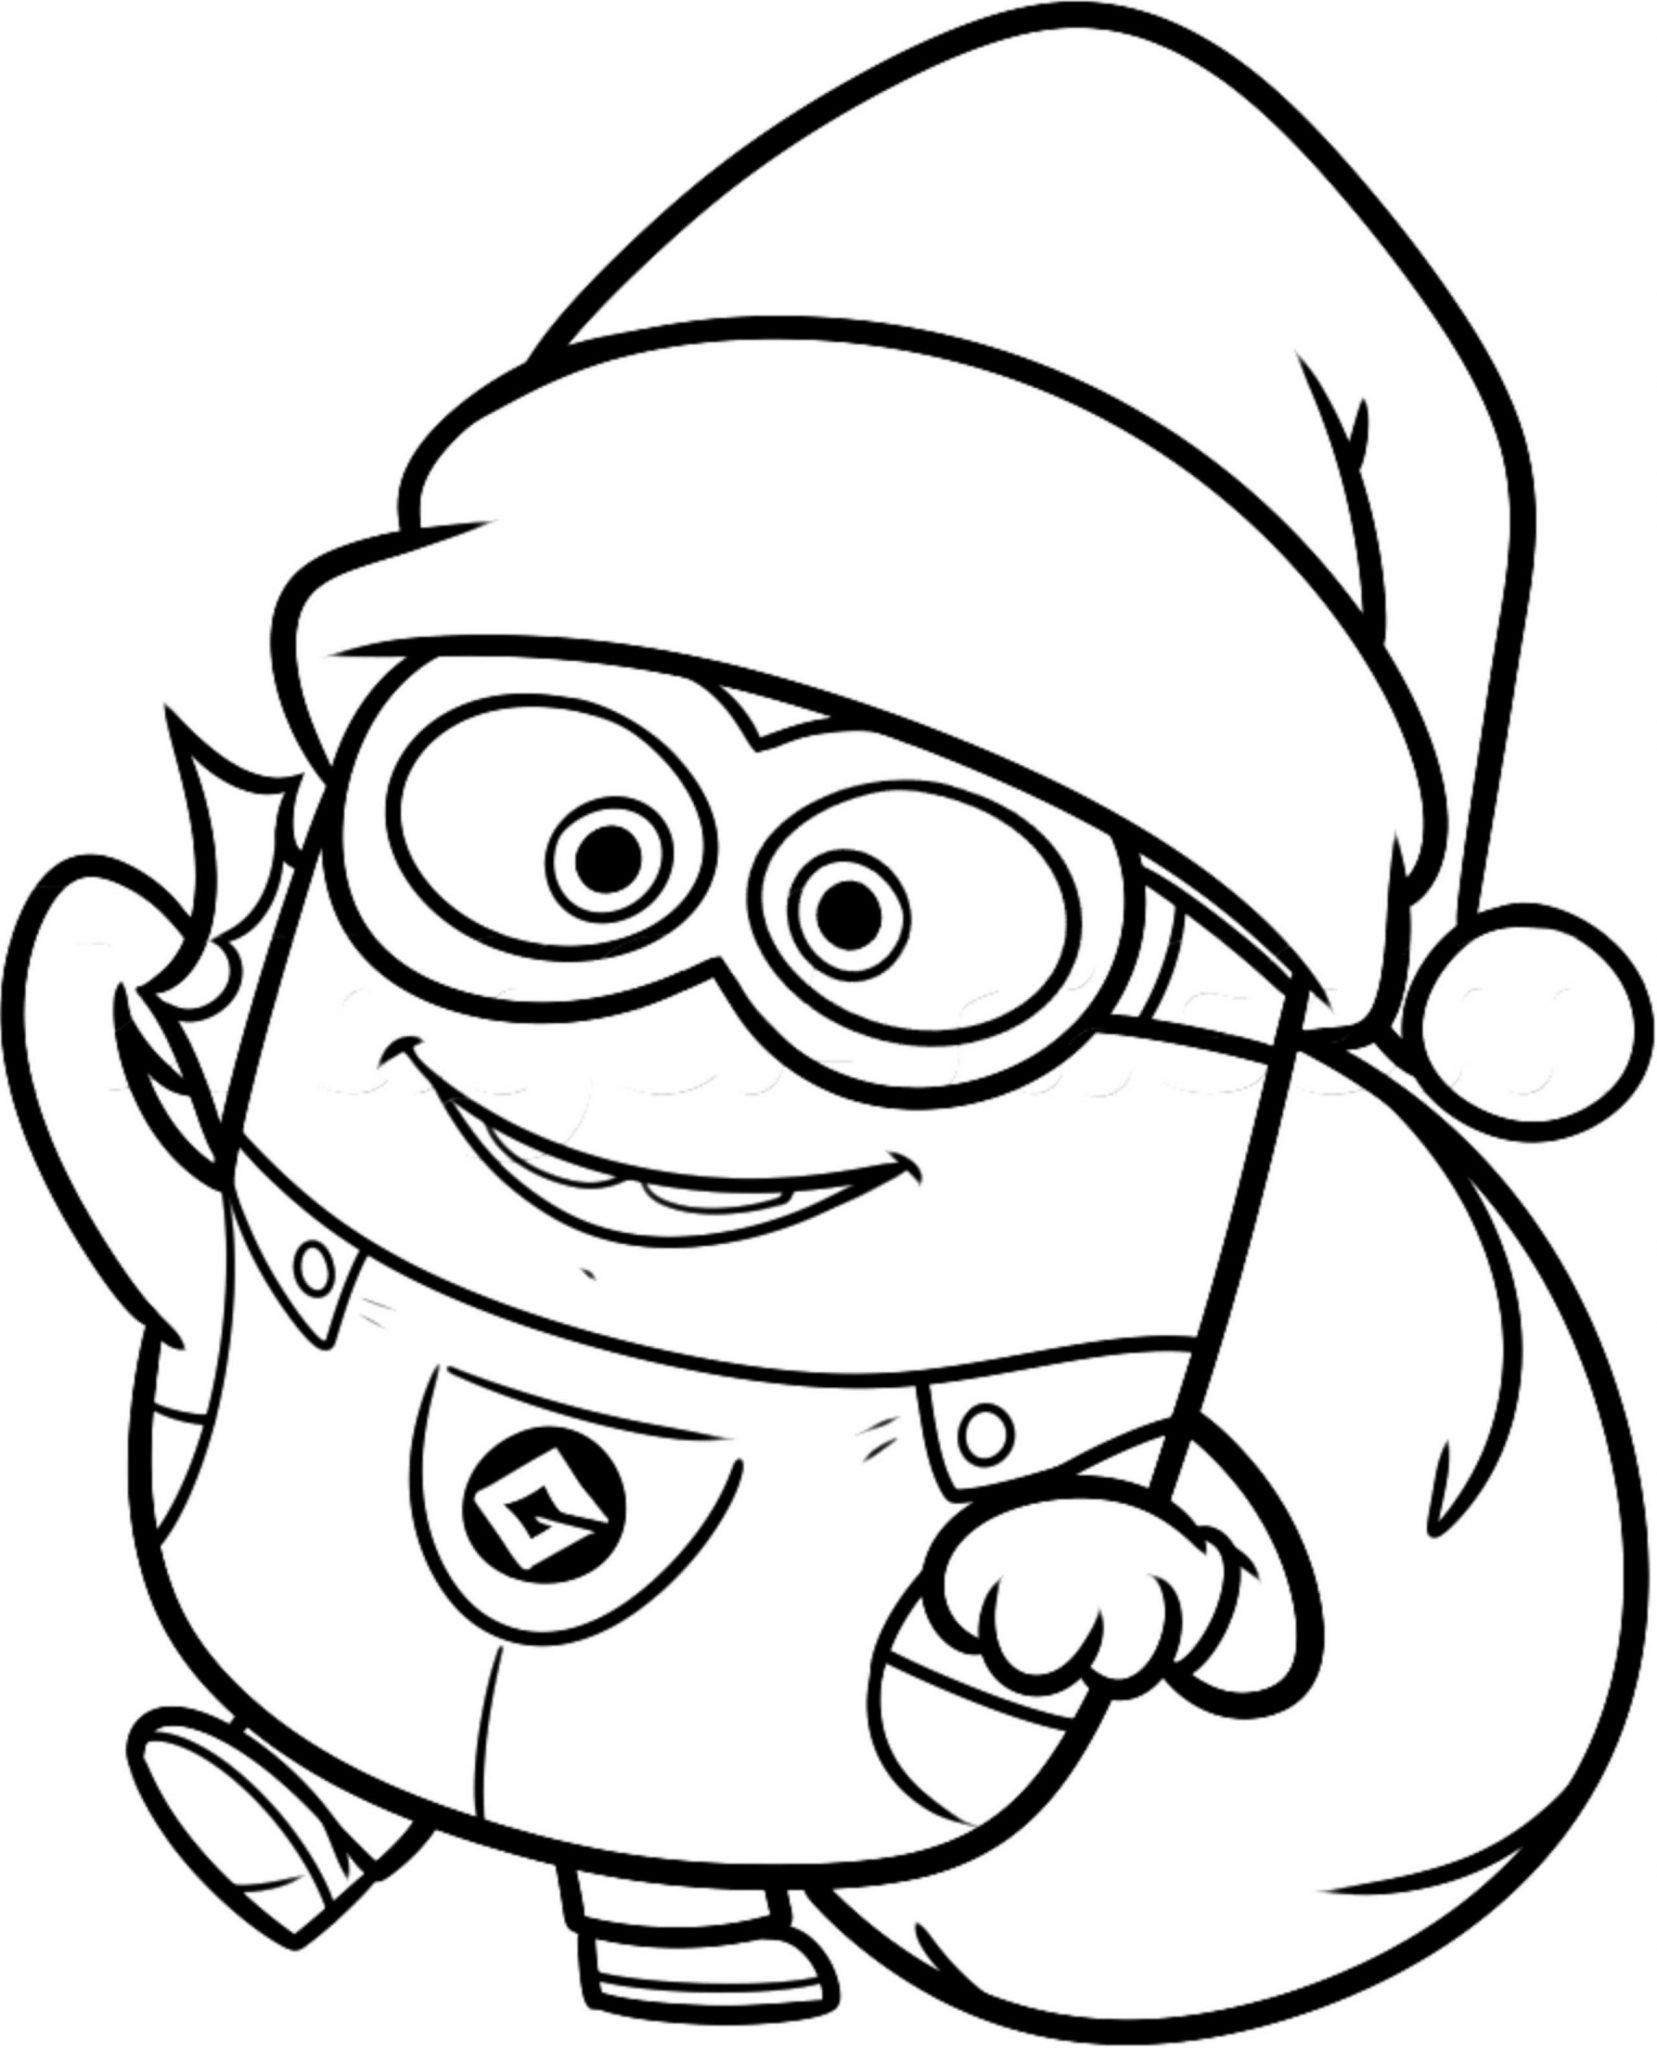 Coloring Pages For Kids Minions
 Print & Download Minion Coloring Pages for Kids to Have